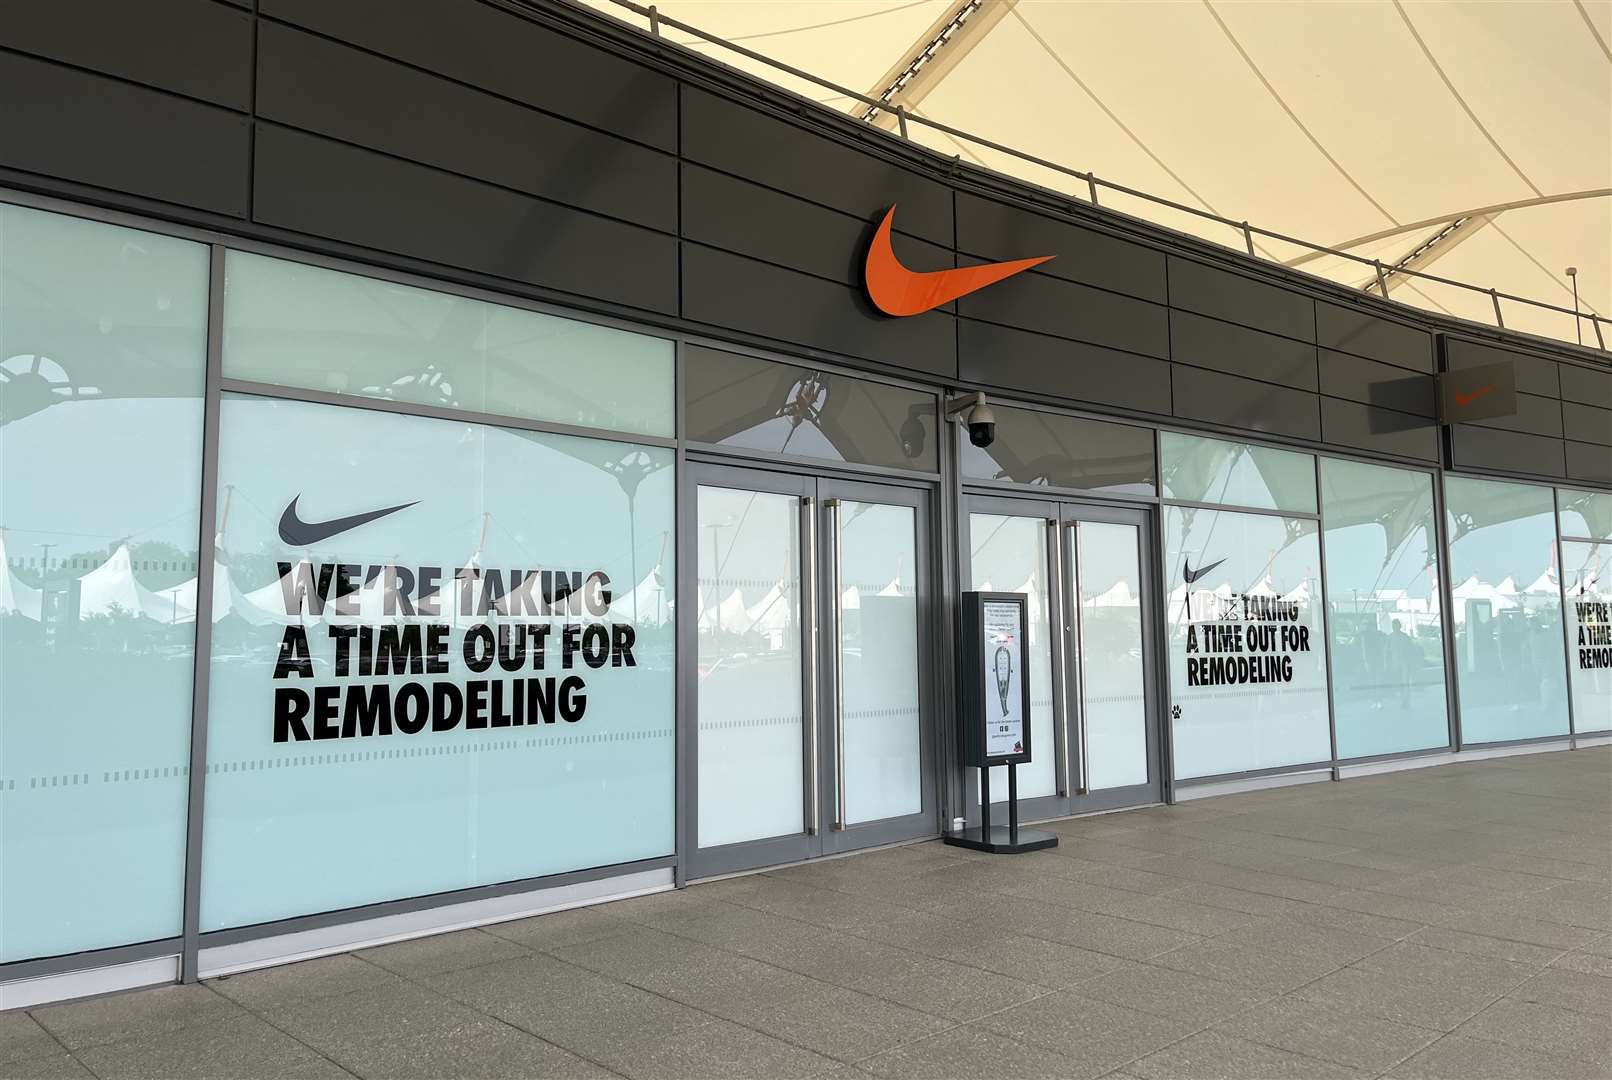 Nike at Ashford Designer Outlet has closed to allow for expansion work